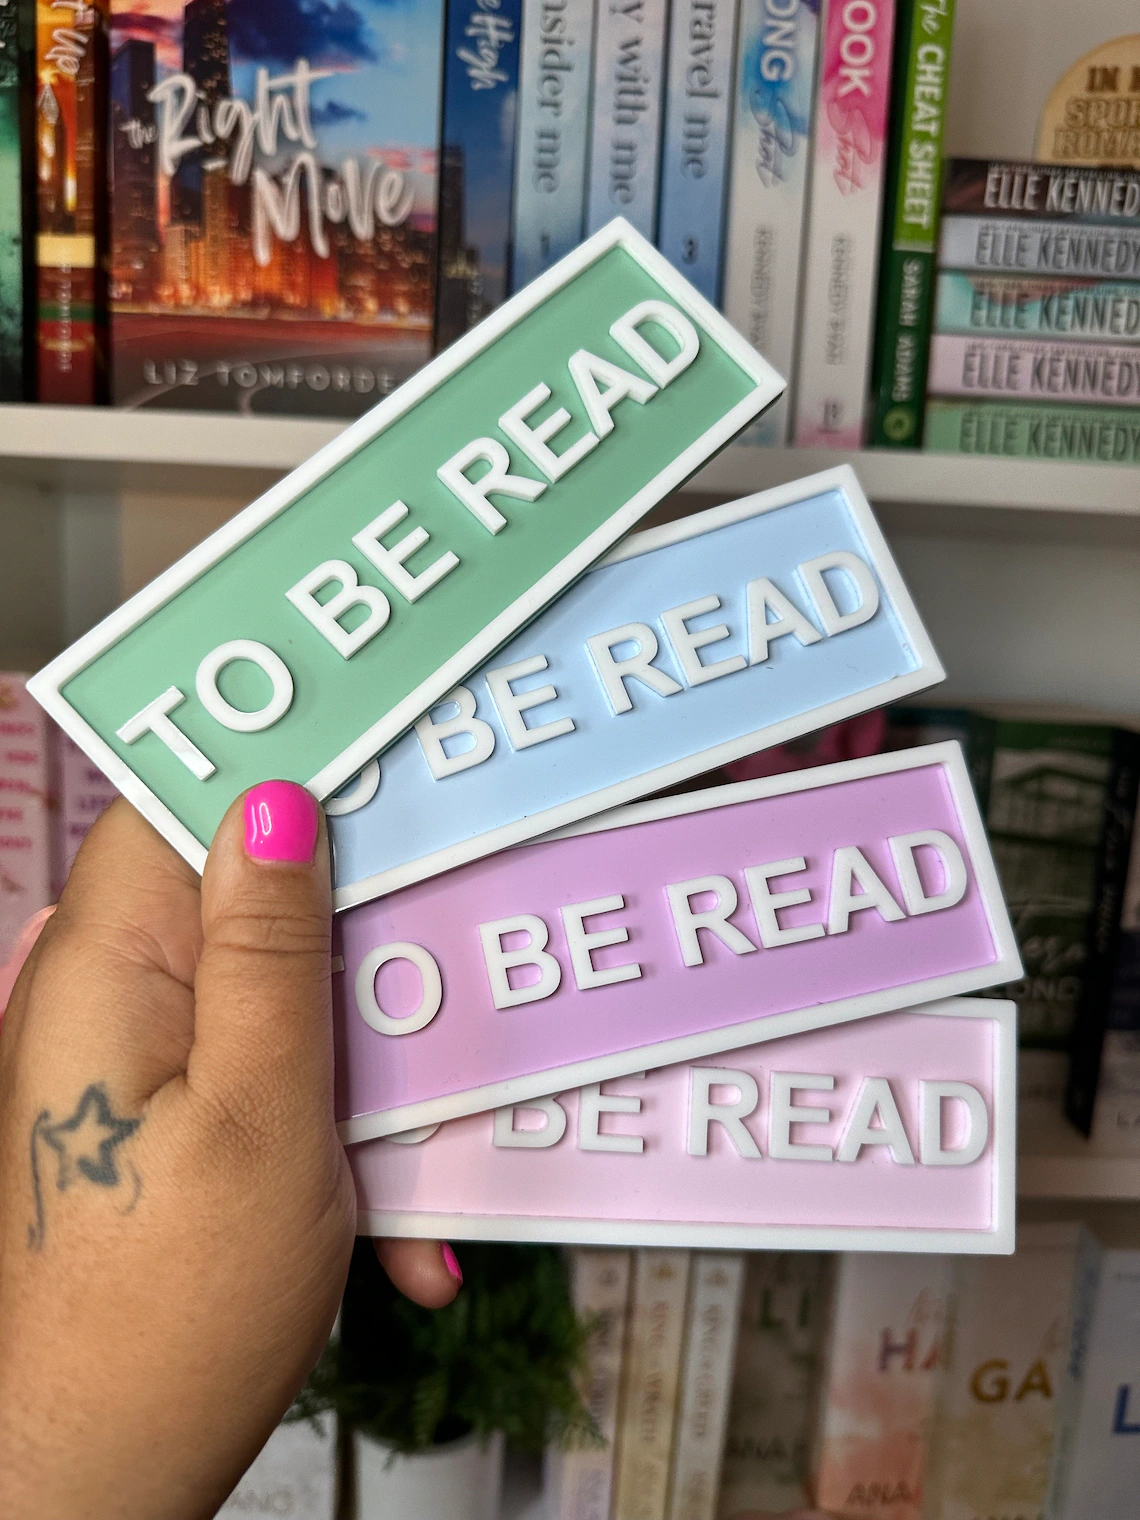 Three To Be Read signs in pastel colors being held by a hand